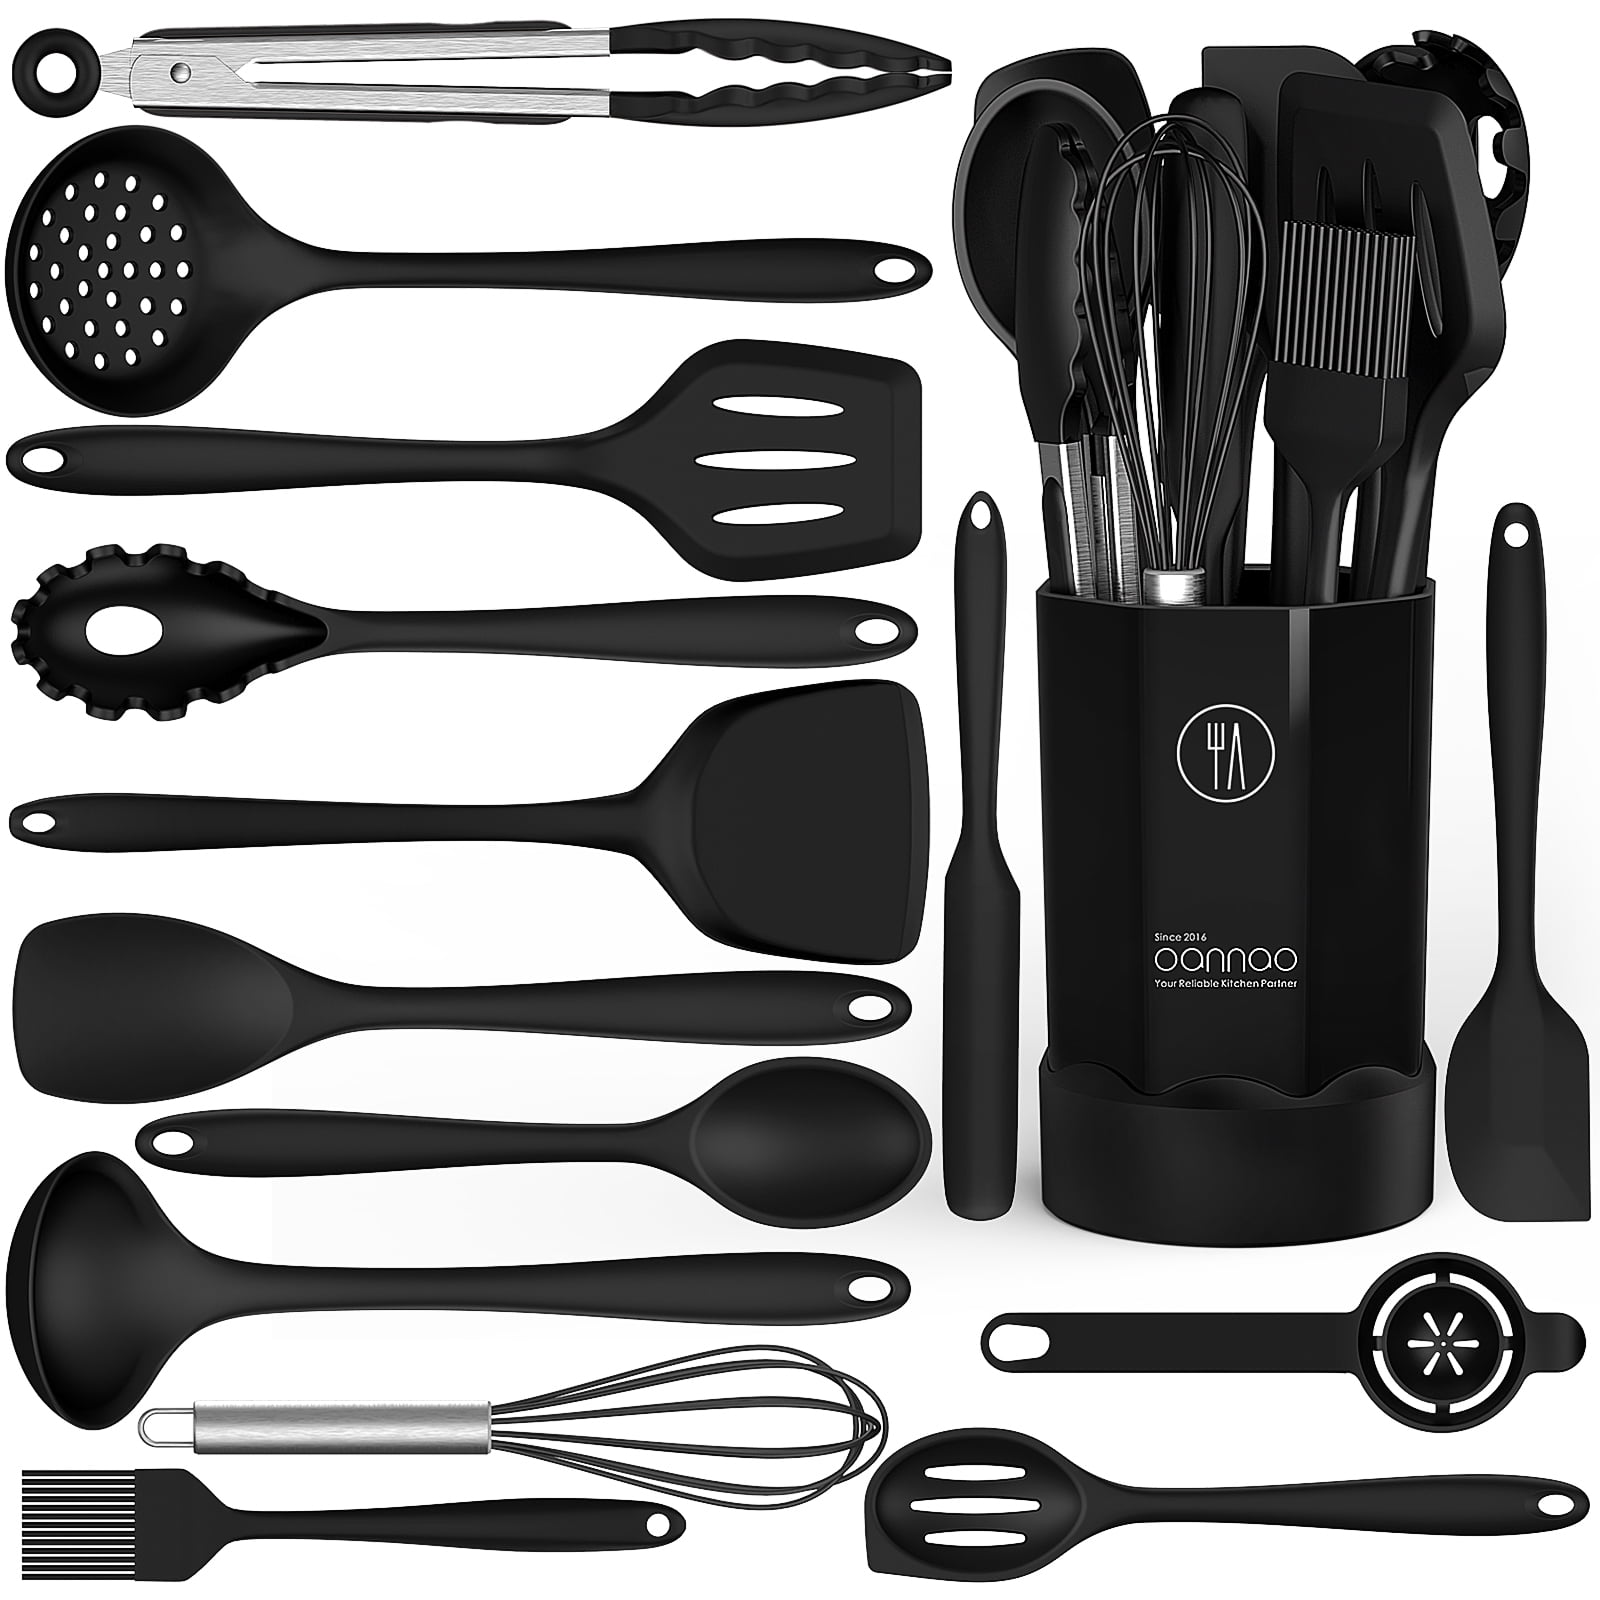 Silicone Cooking Utensils Set - 446°F Heat Resistant Silicone Kitchen  Utensils for Cooking,Kitchen Utensil